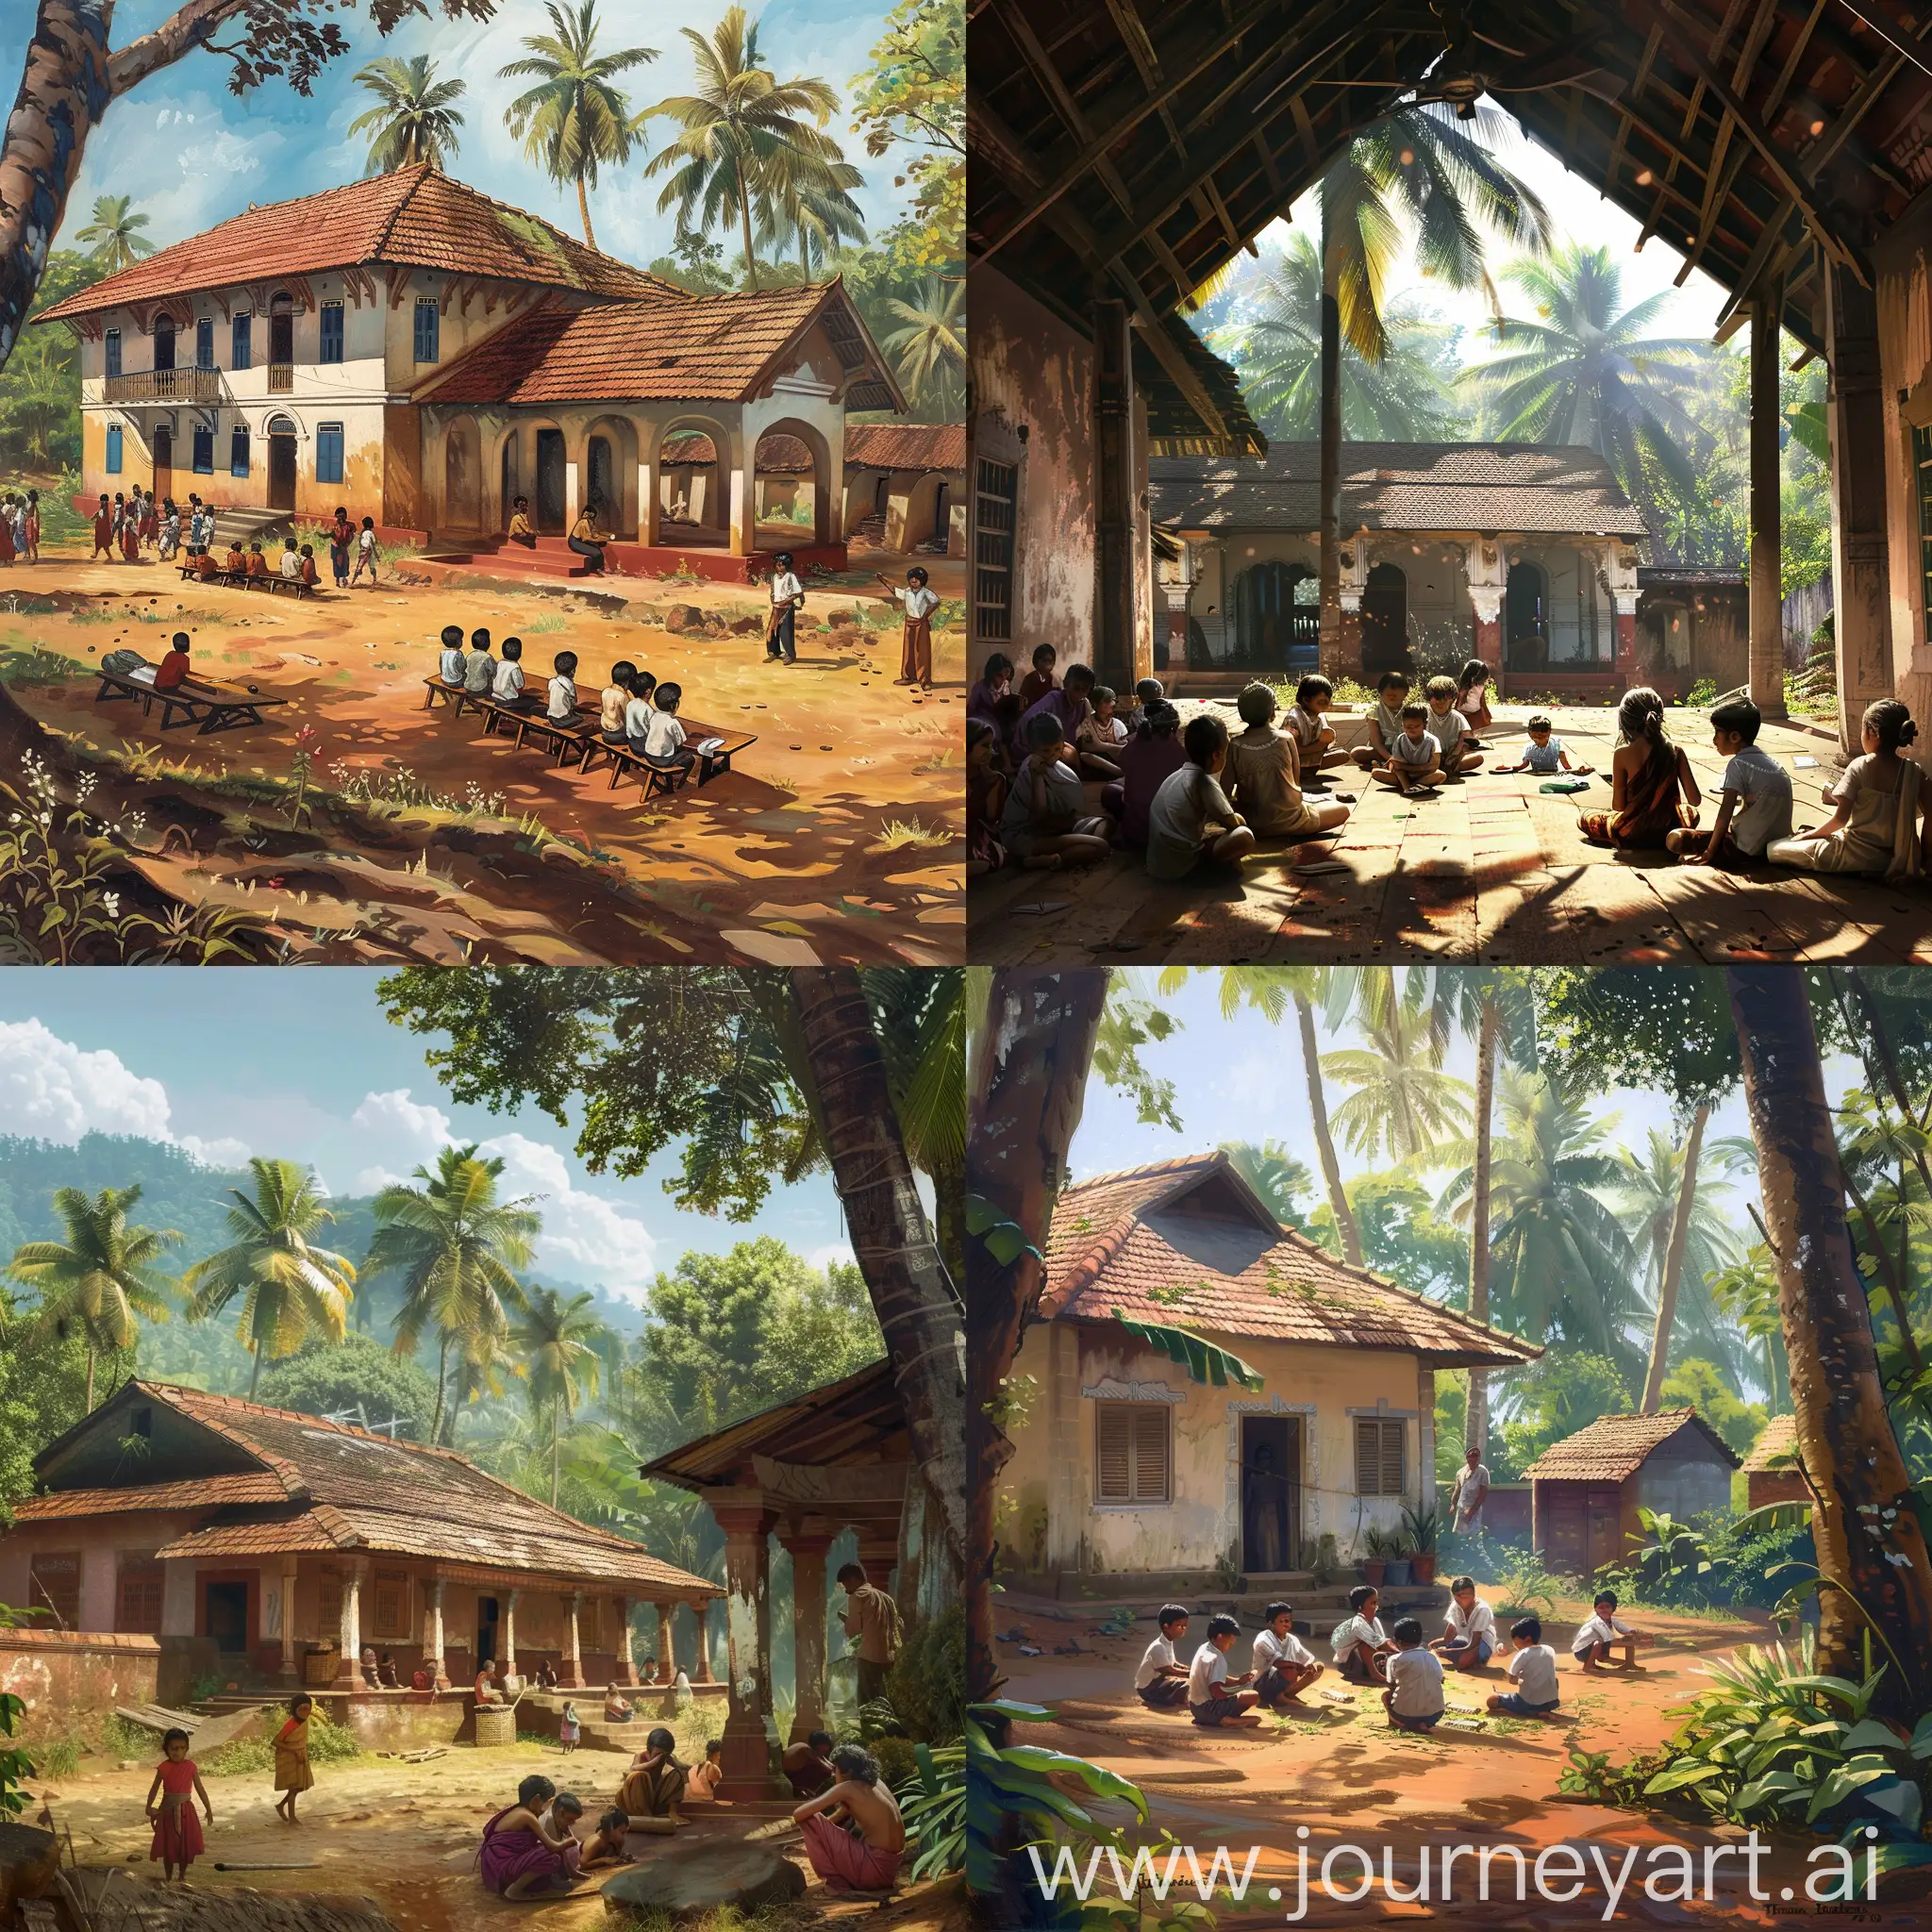 Traditional-Kerala-School-with-Children-Learning-Malayalam